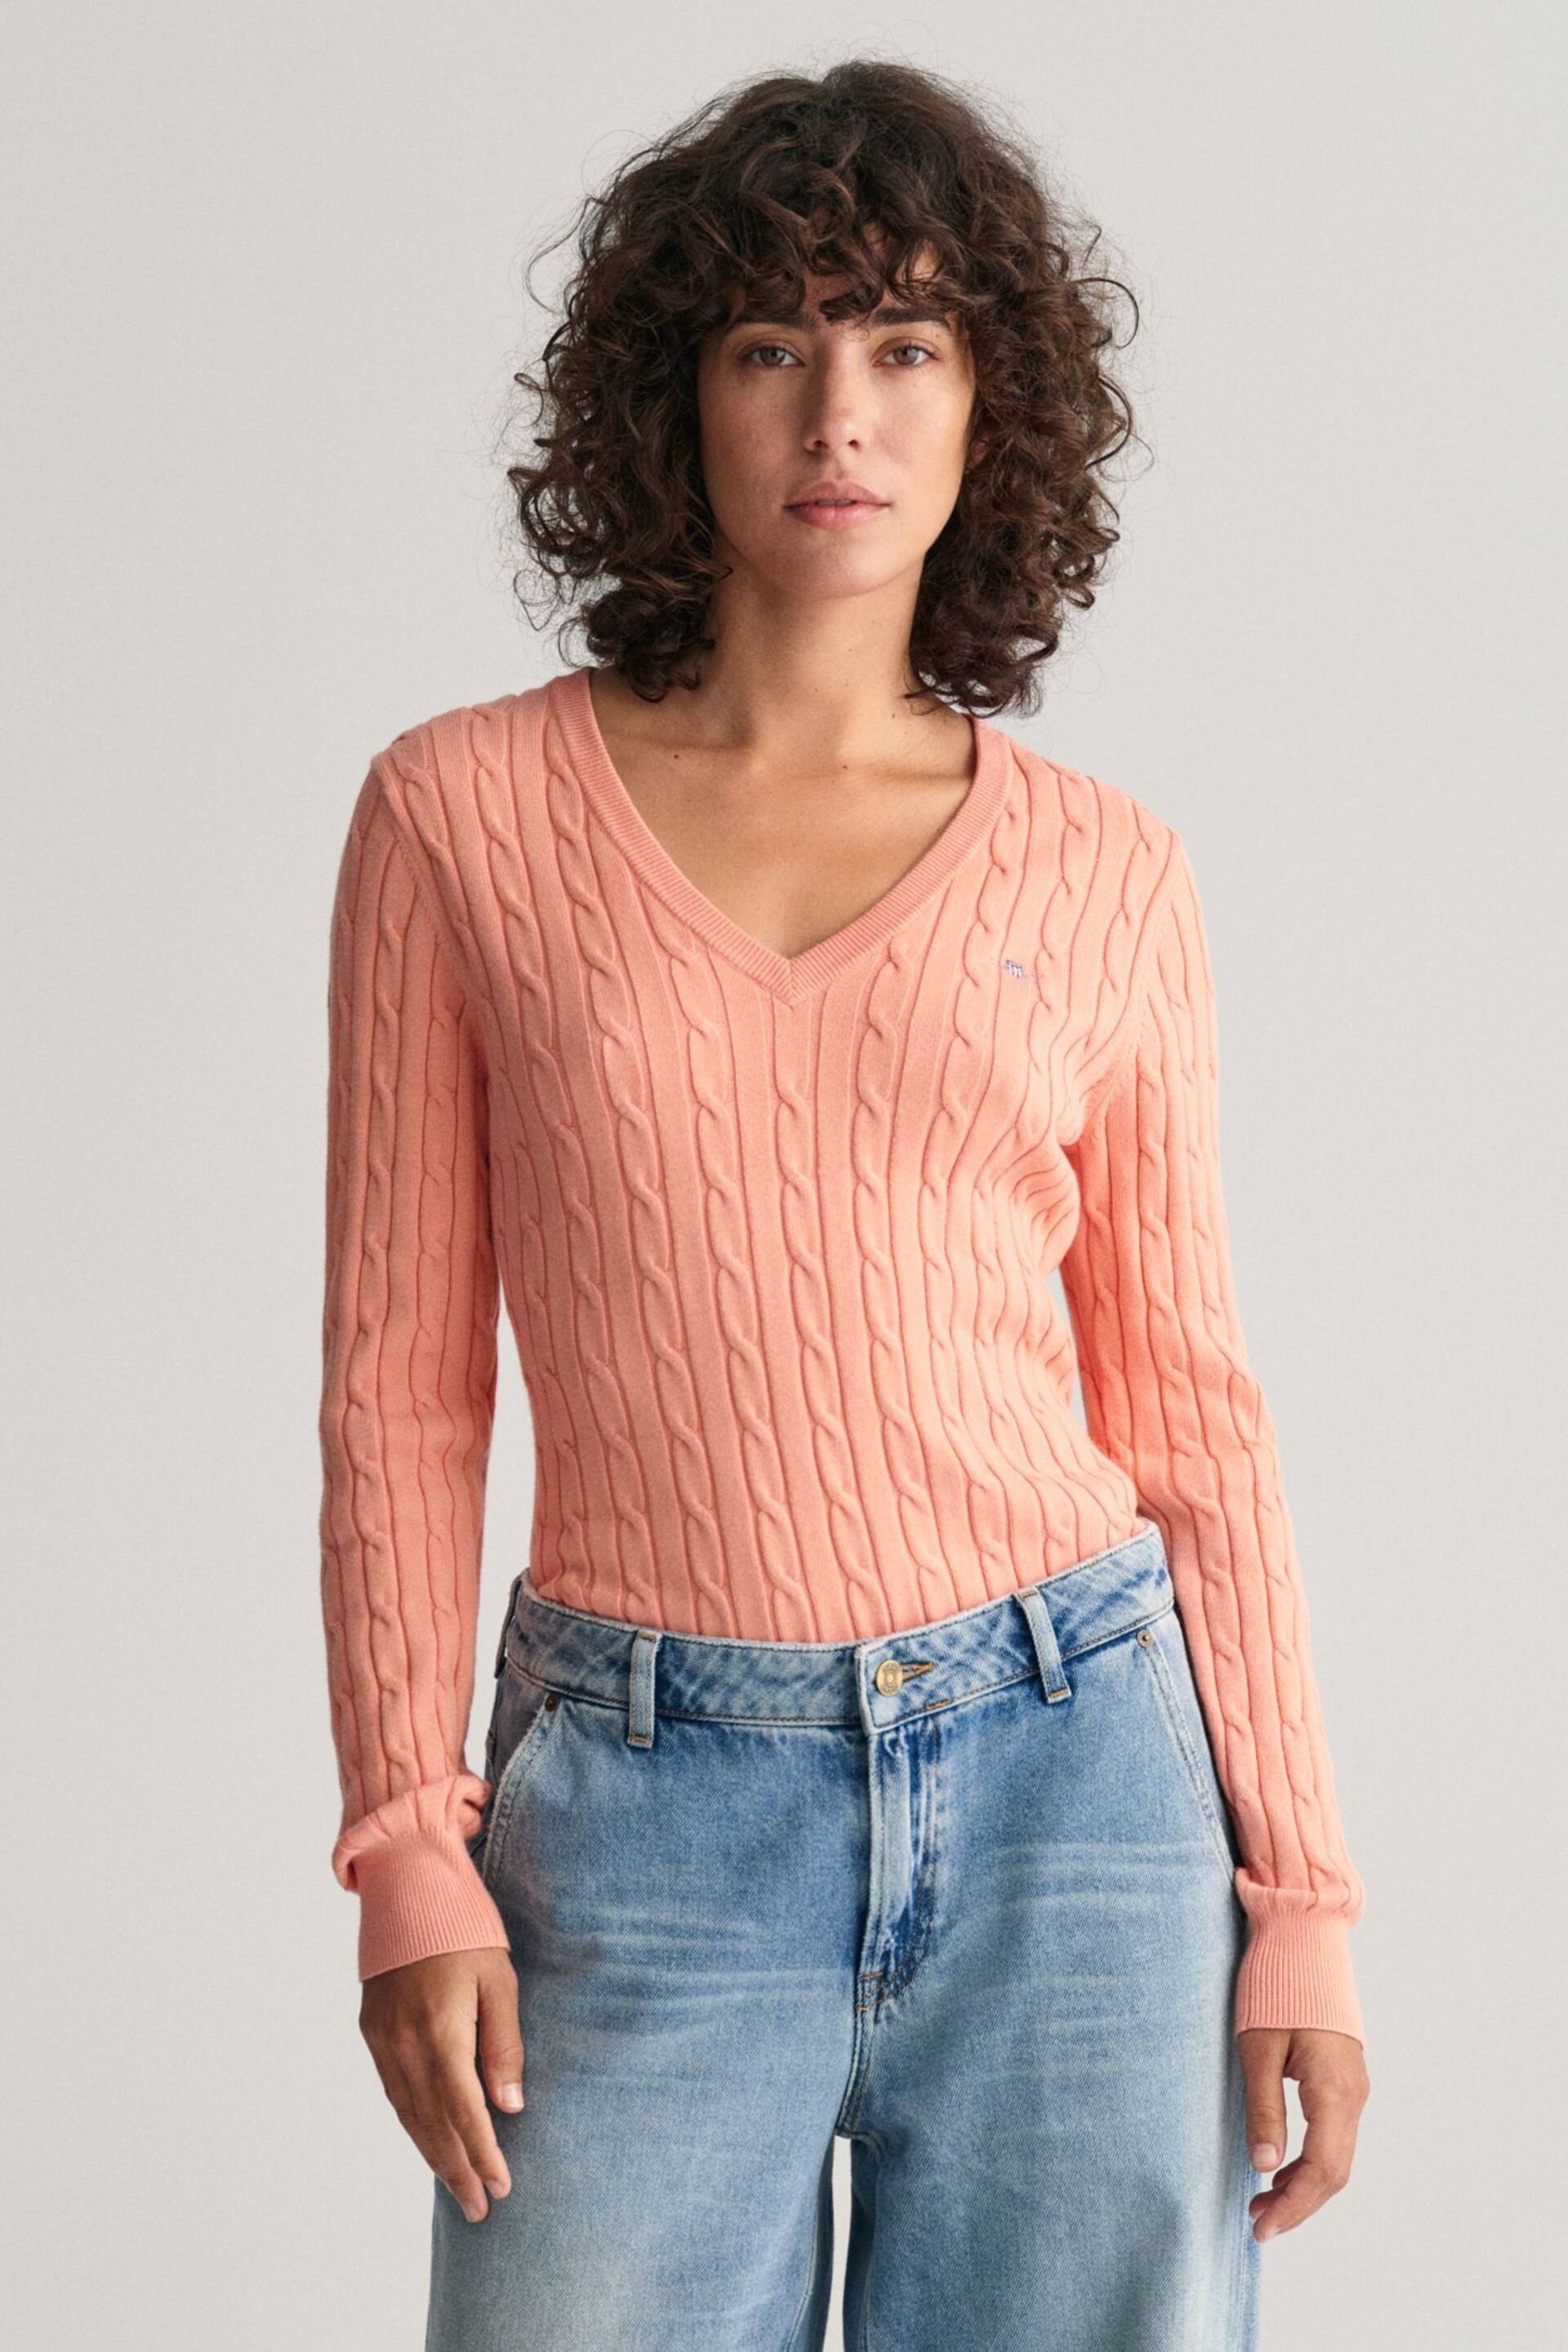 GANT Stretch Cotton Cable Knit Jumper - Image 1 of 4